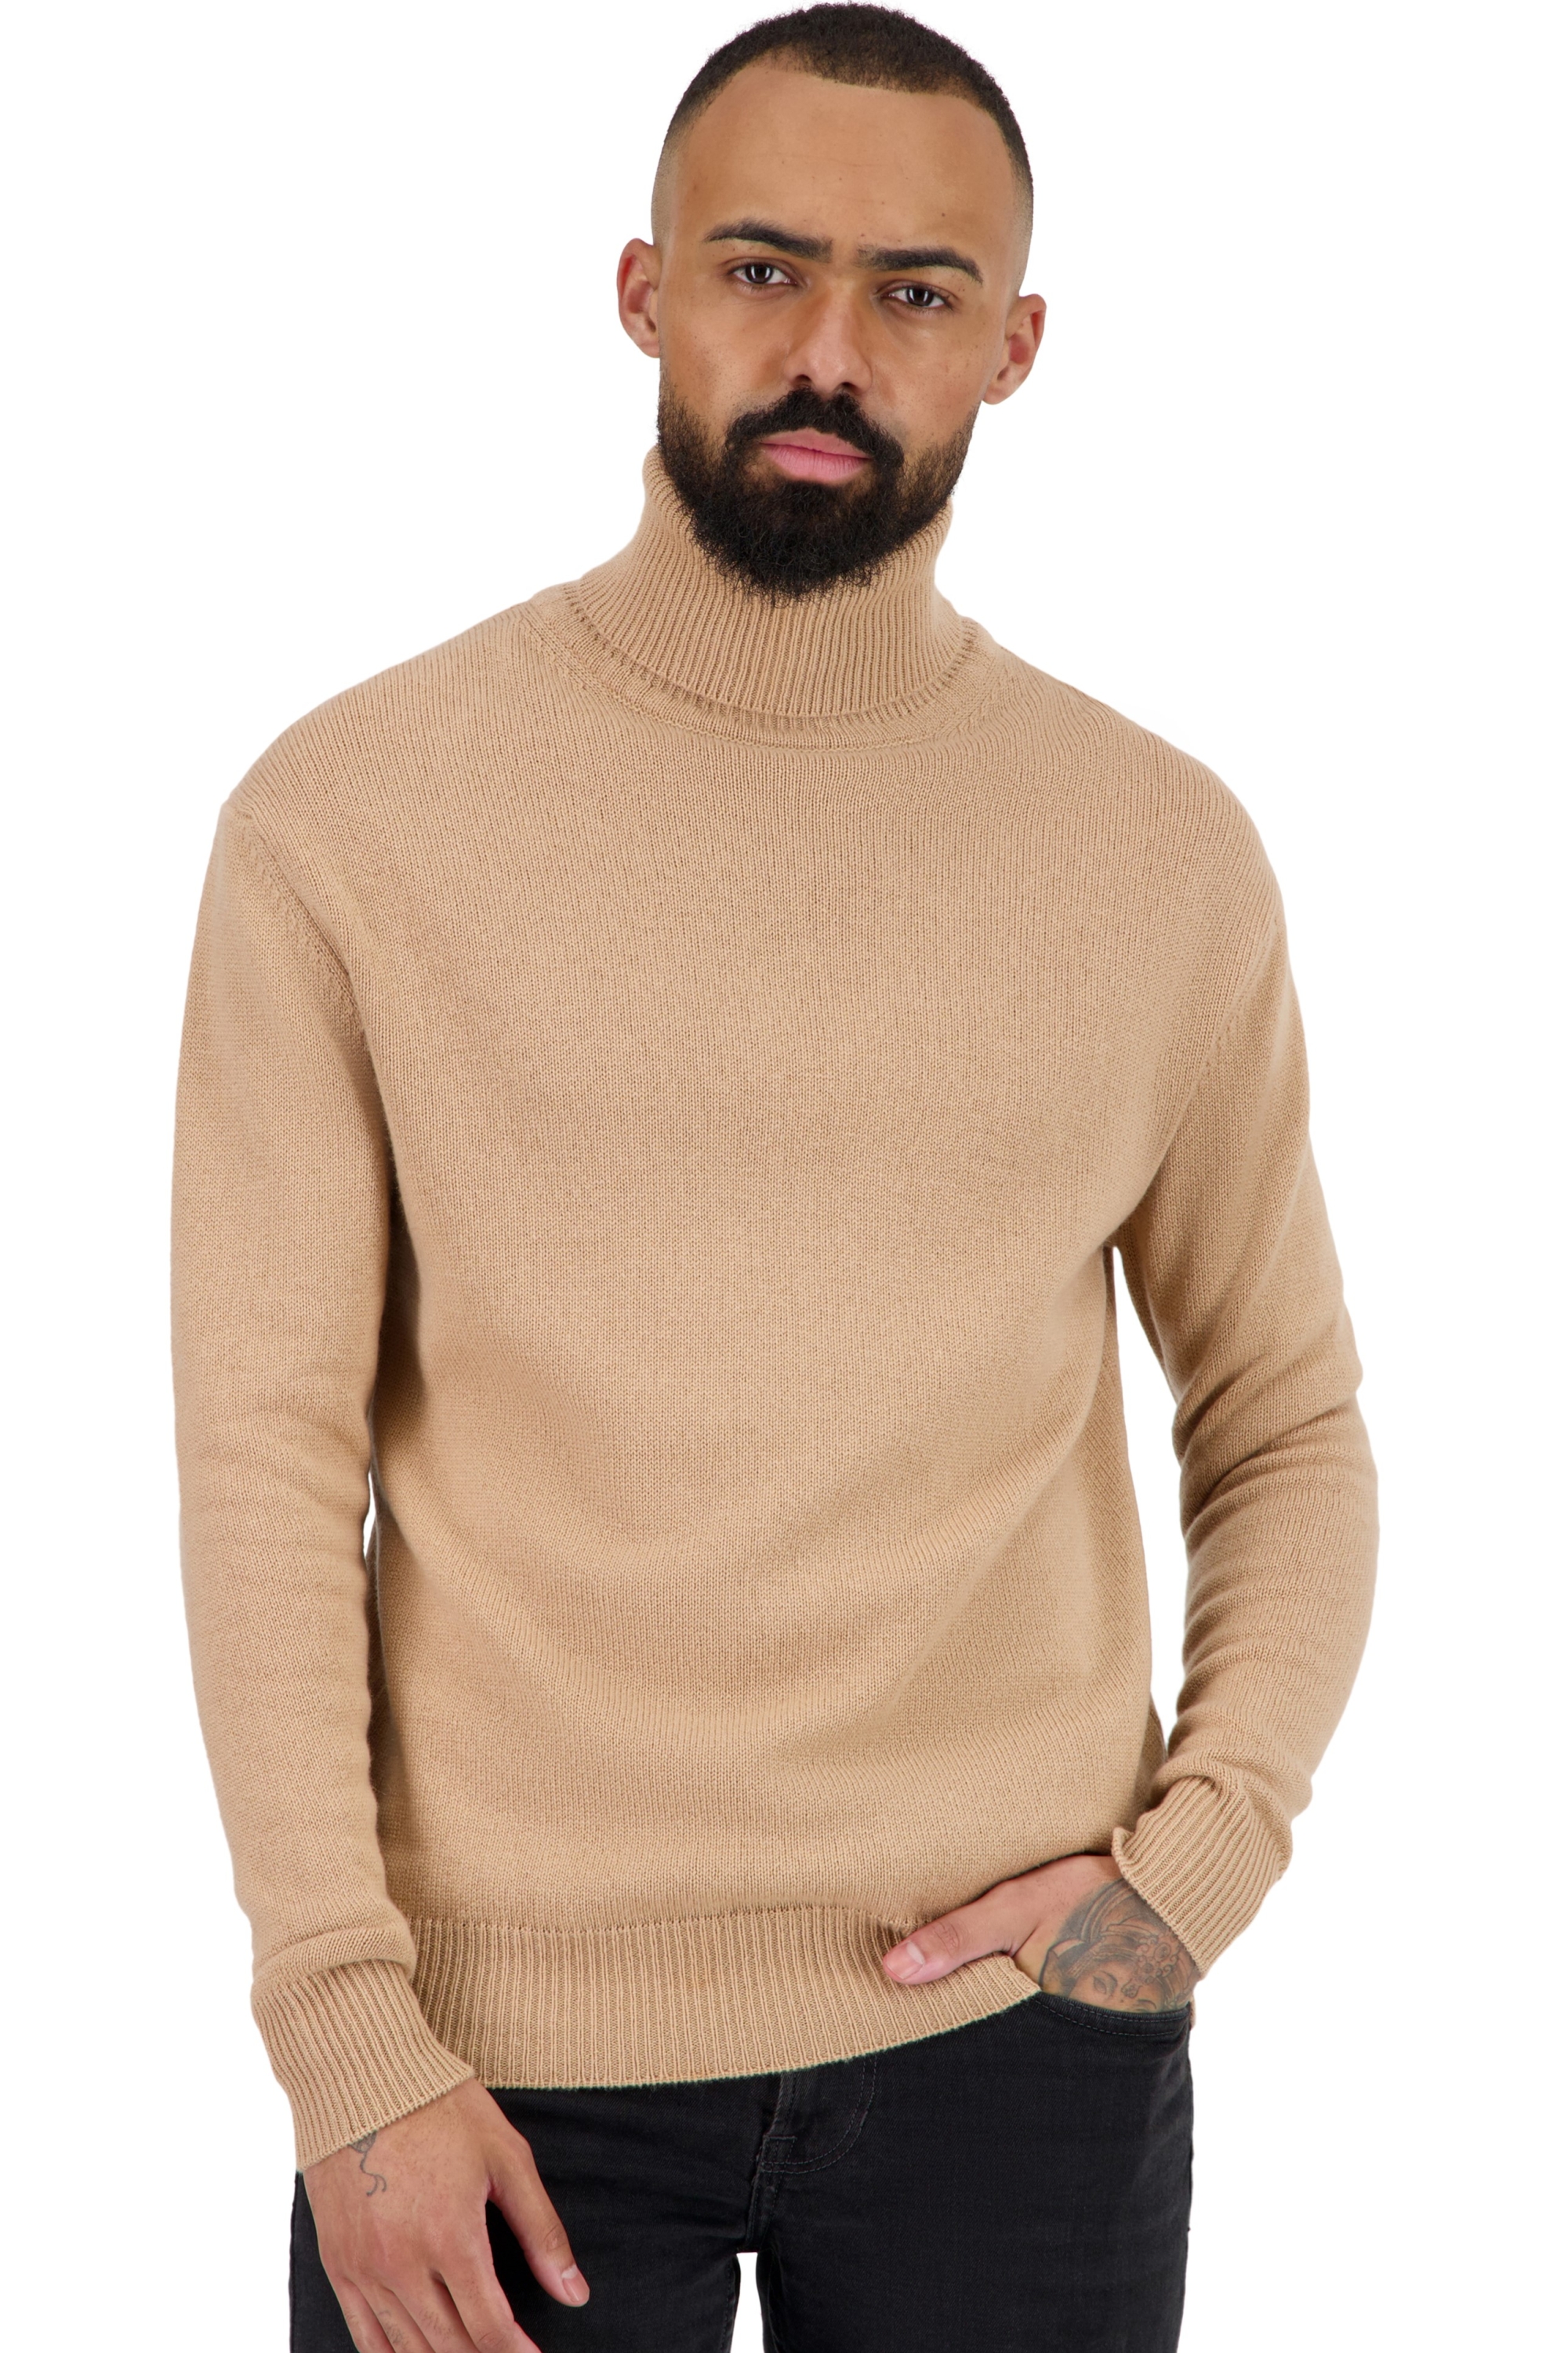 Cachemire pull homme col roule torino first creme brulee l